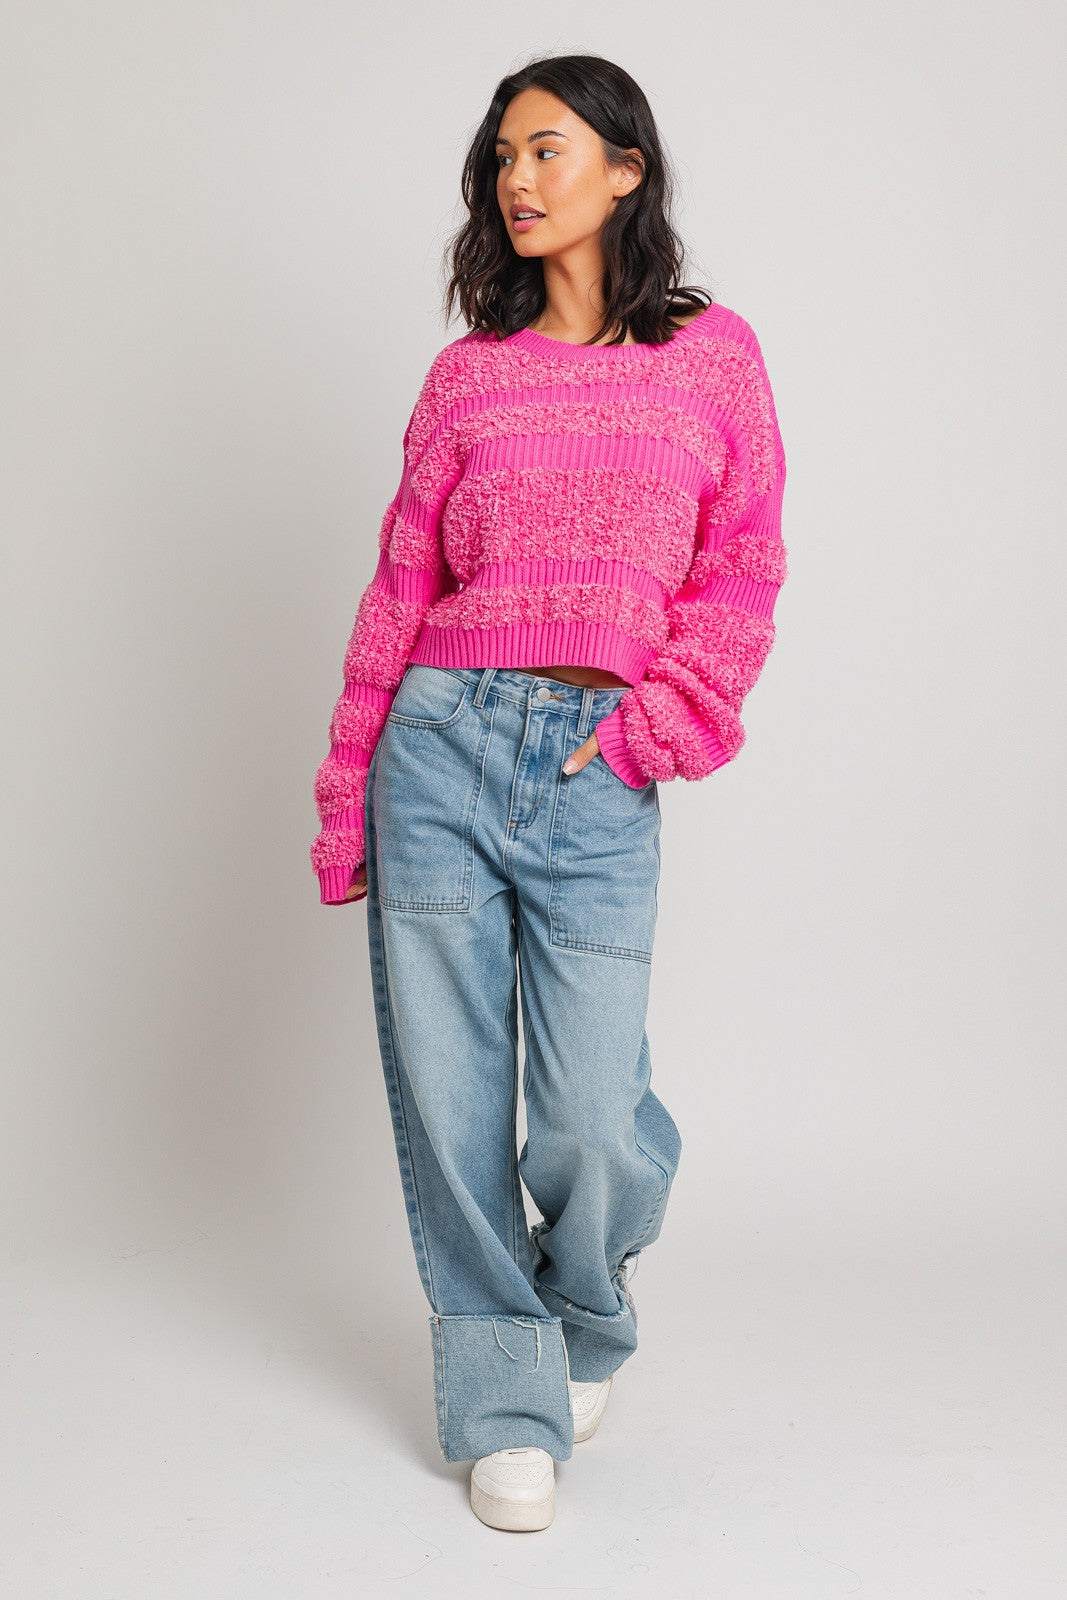 Le Lis | Pink Textured Stripe Sweater | Sweetest Stitch Online Store